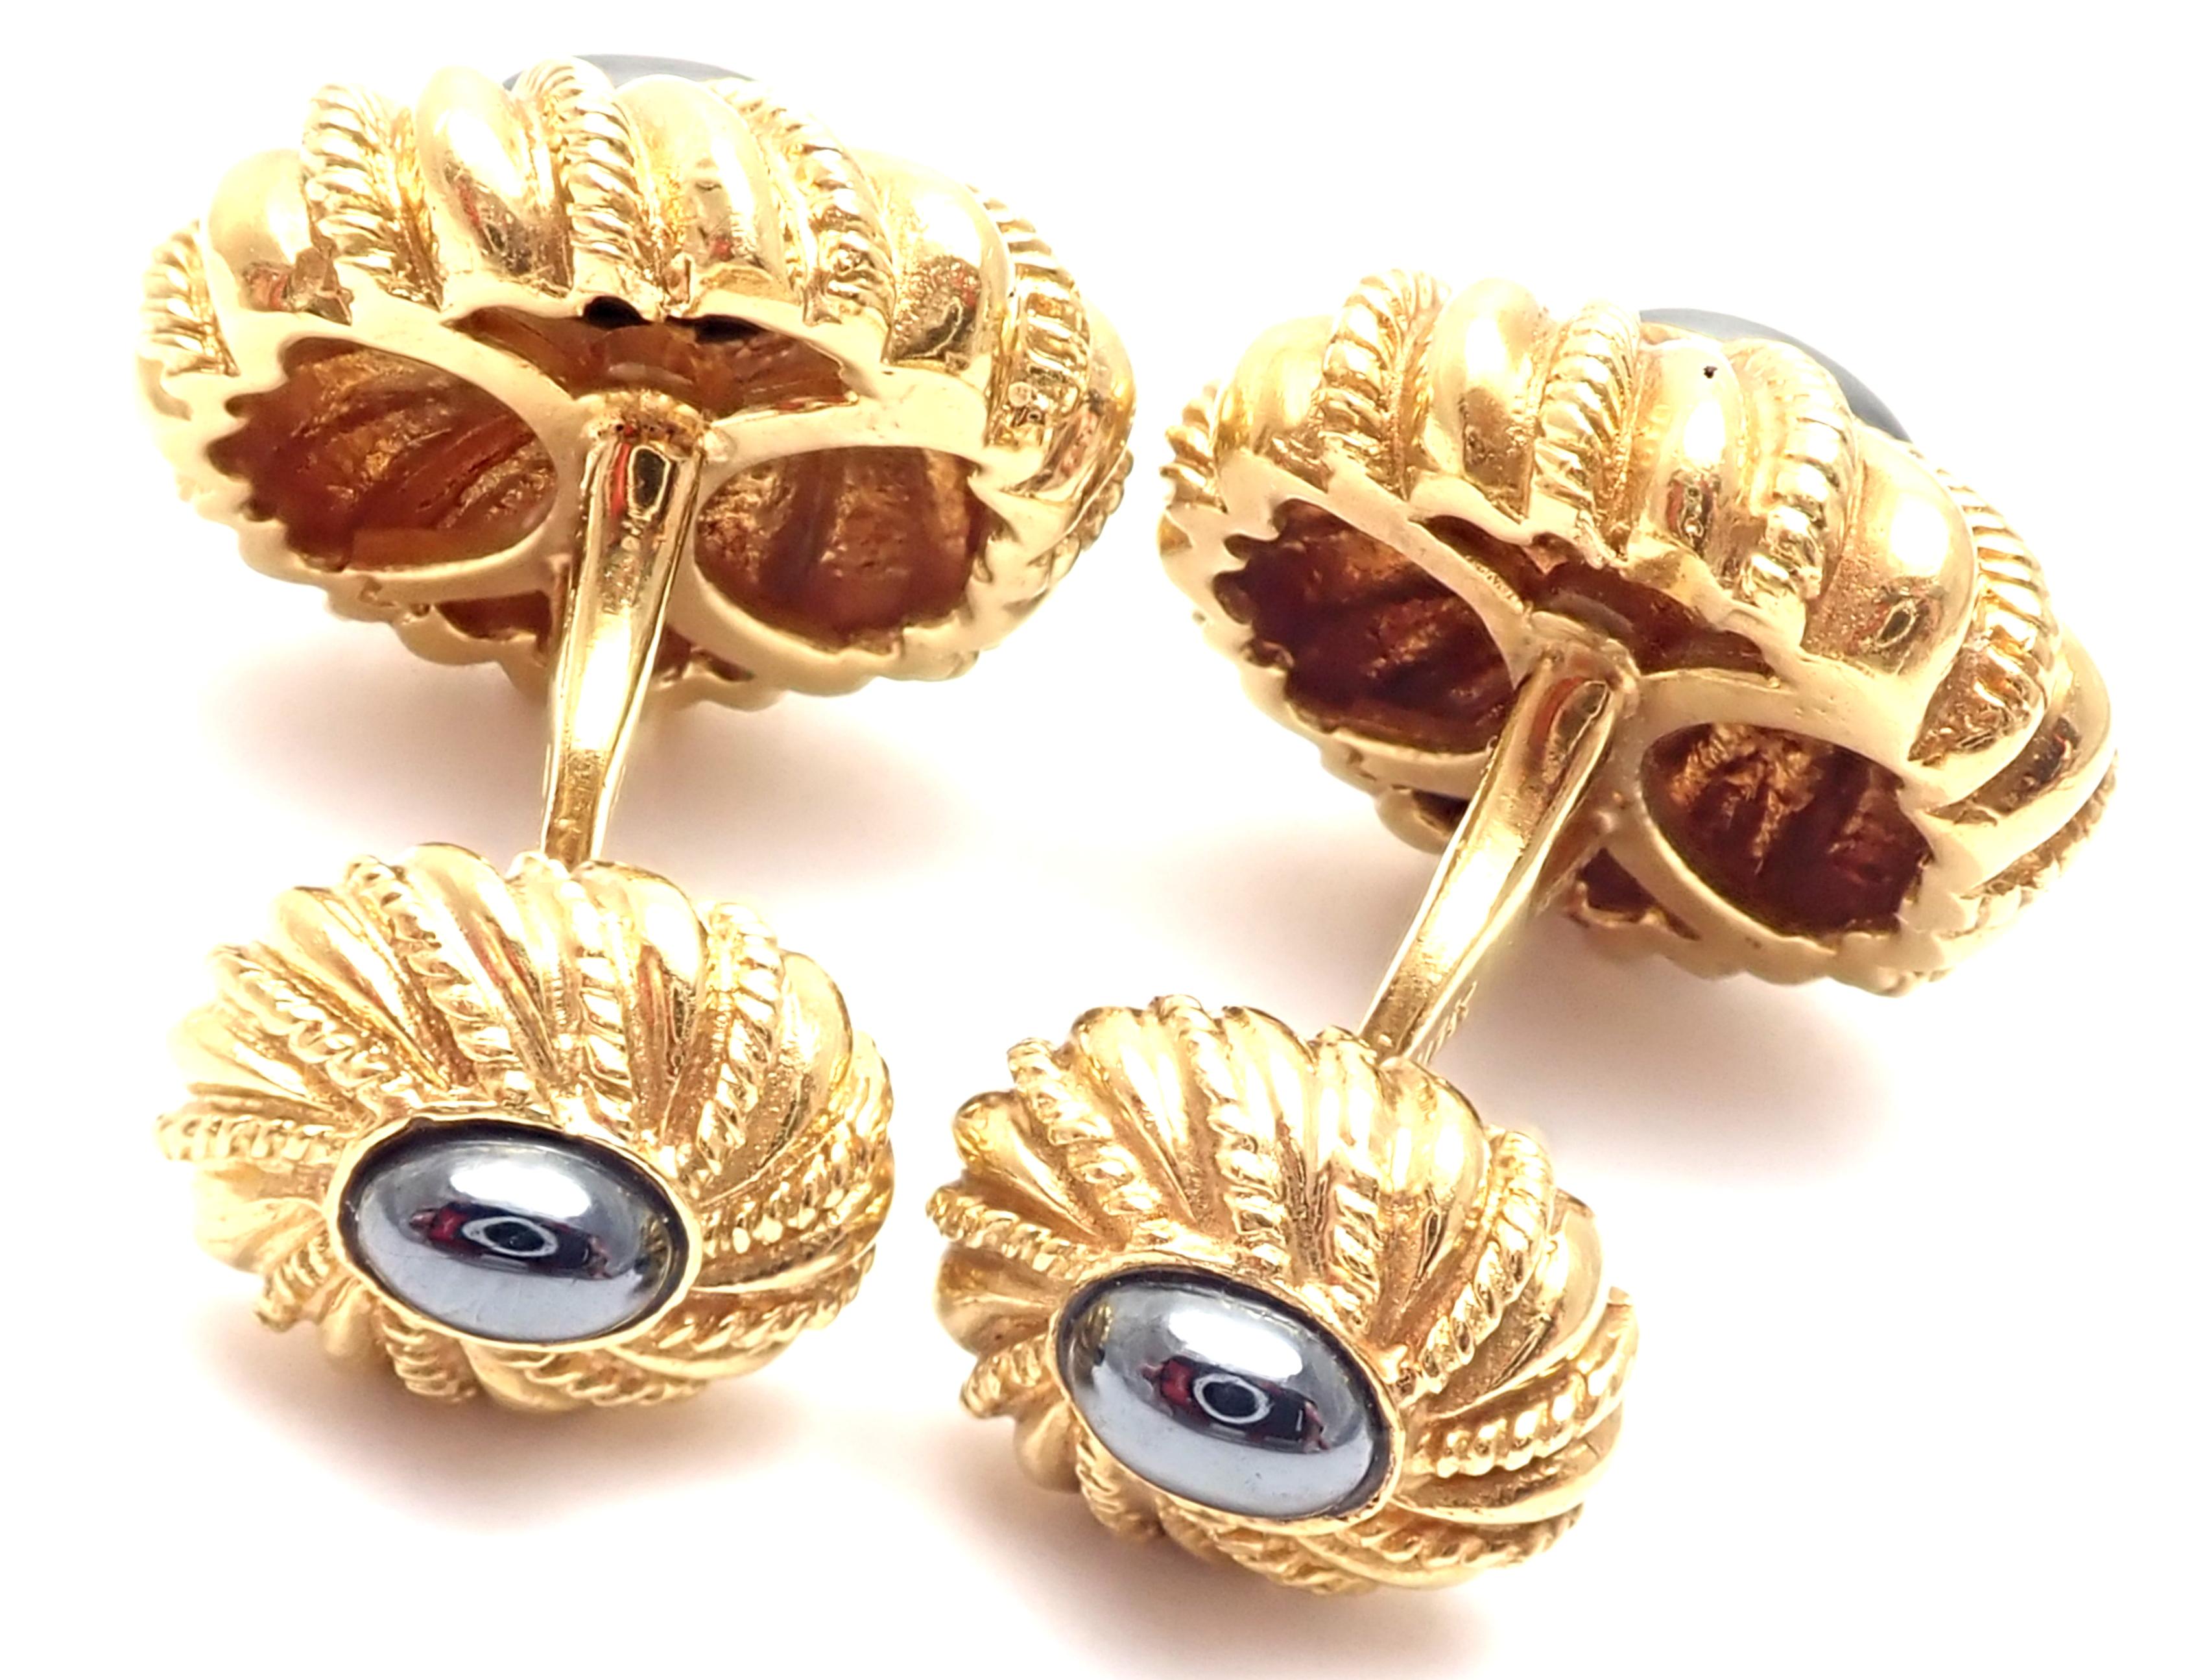 Tiffany & Co. Jean Schlumberger Hematite Yellow Gold Cufflinks In Excellent Condition For Sale In Holland, PA